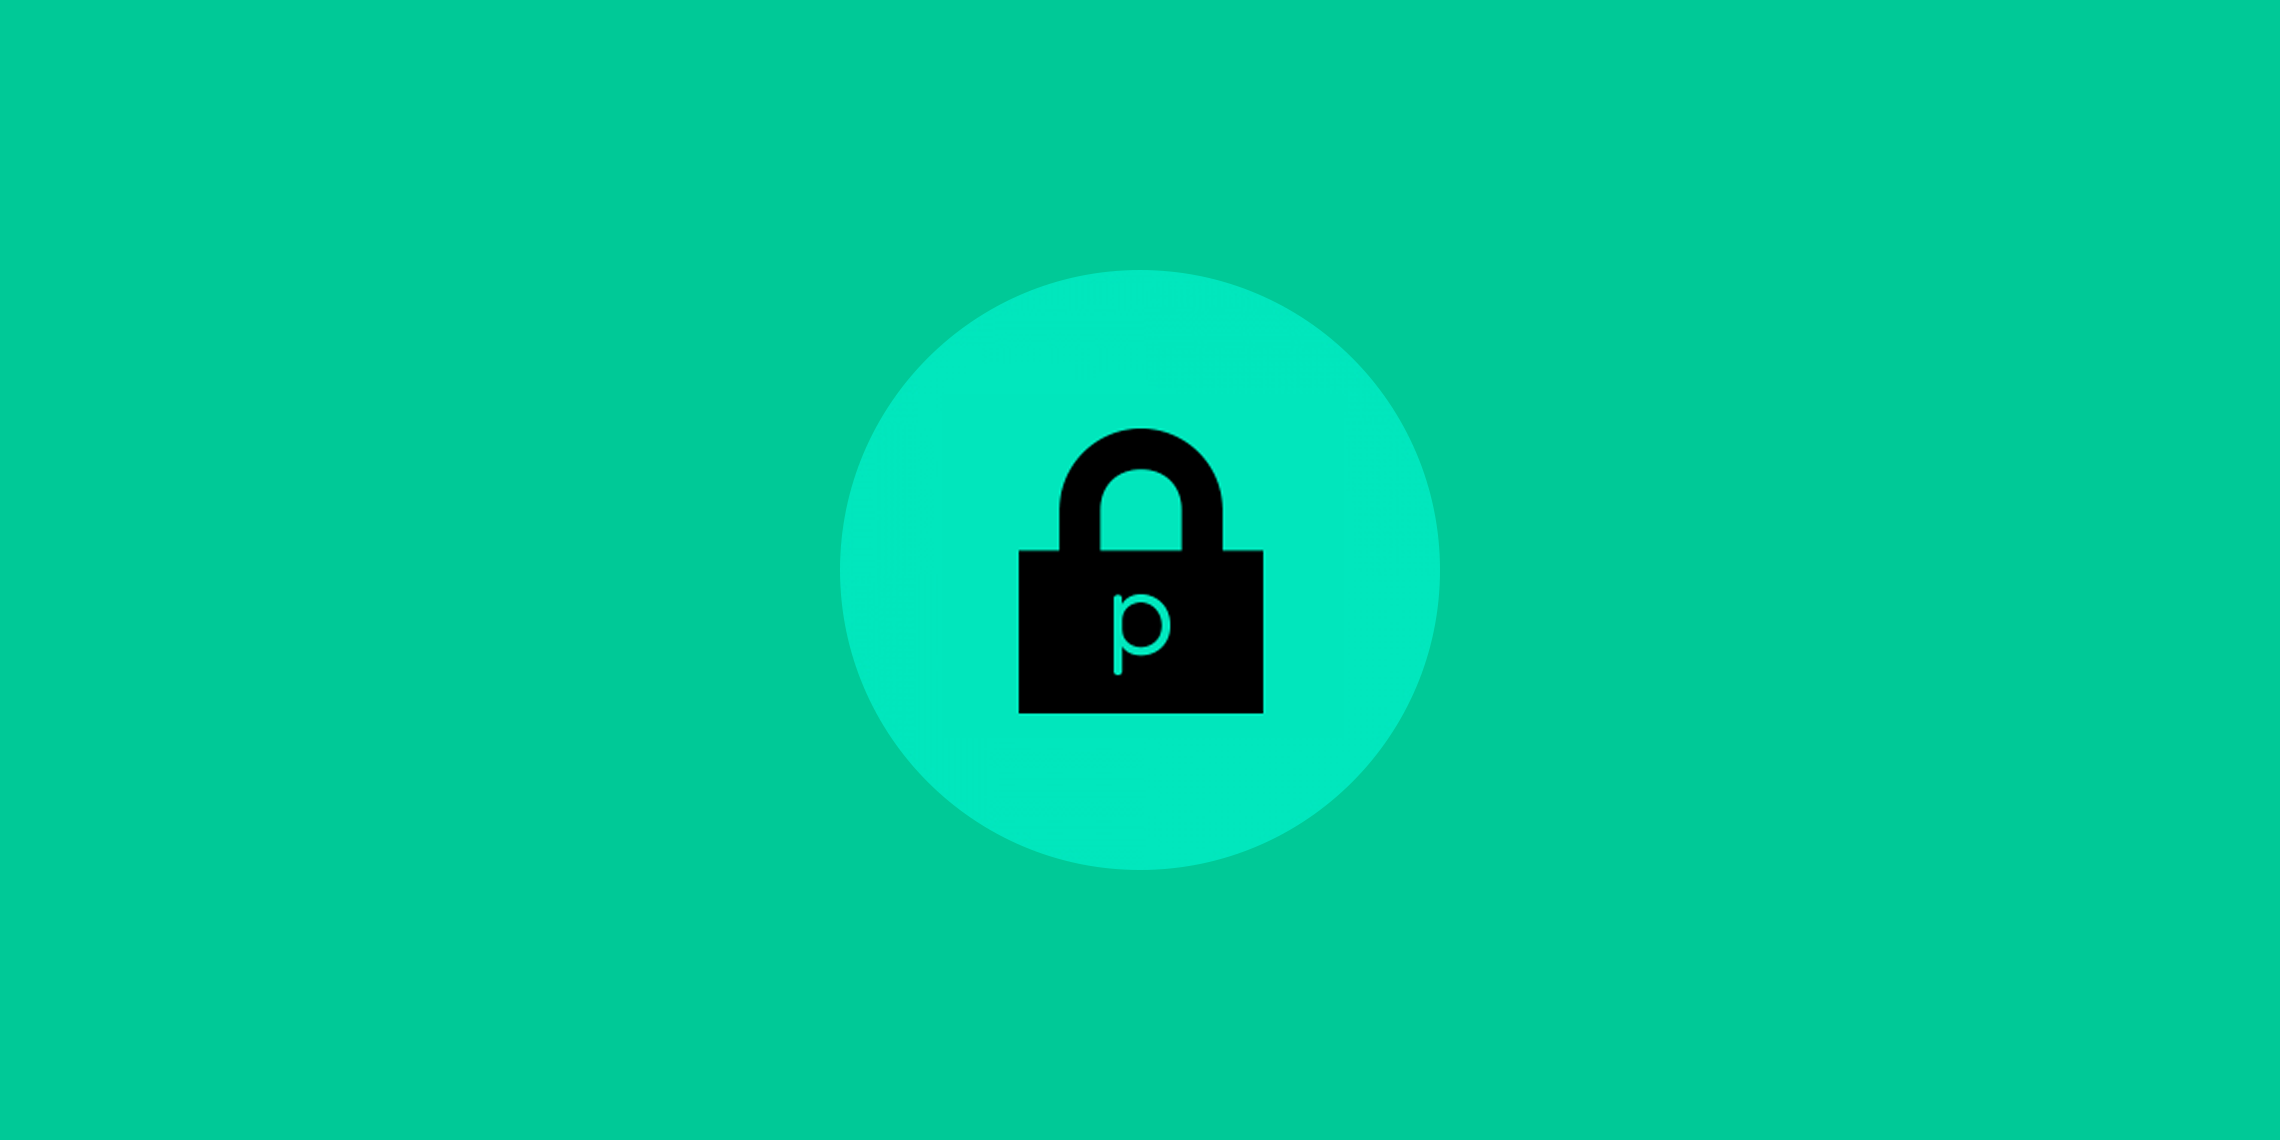 proposify's permissions feature launch